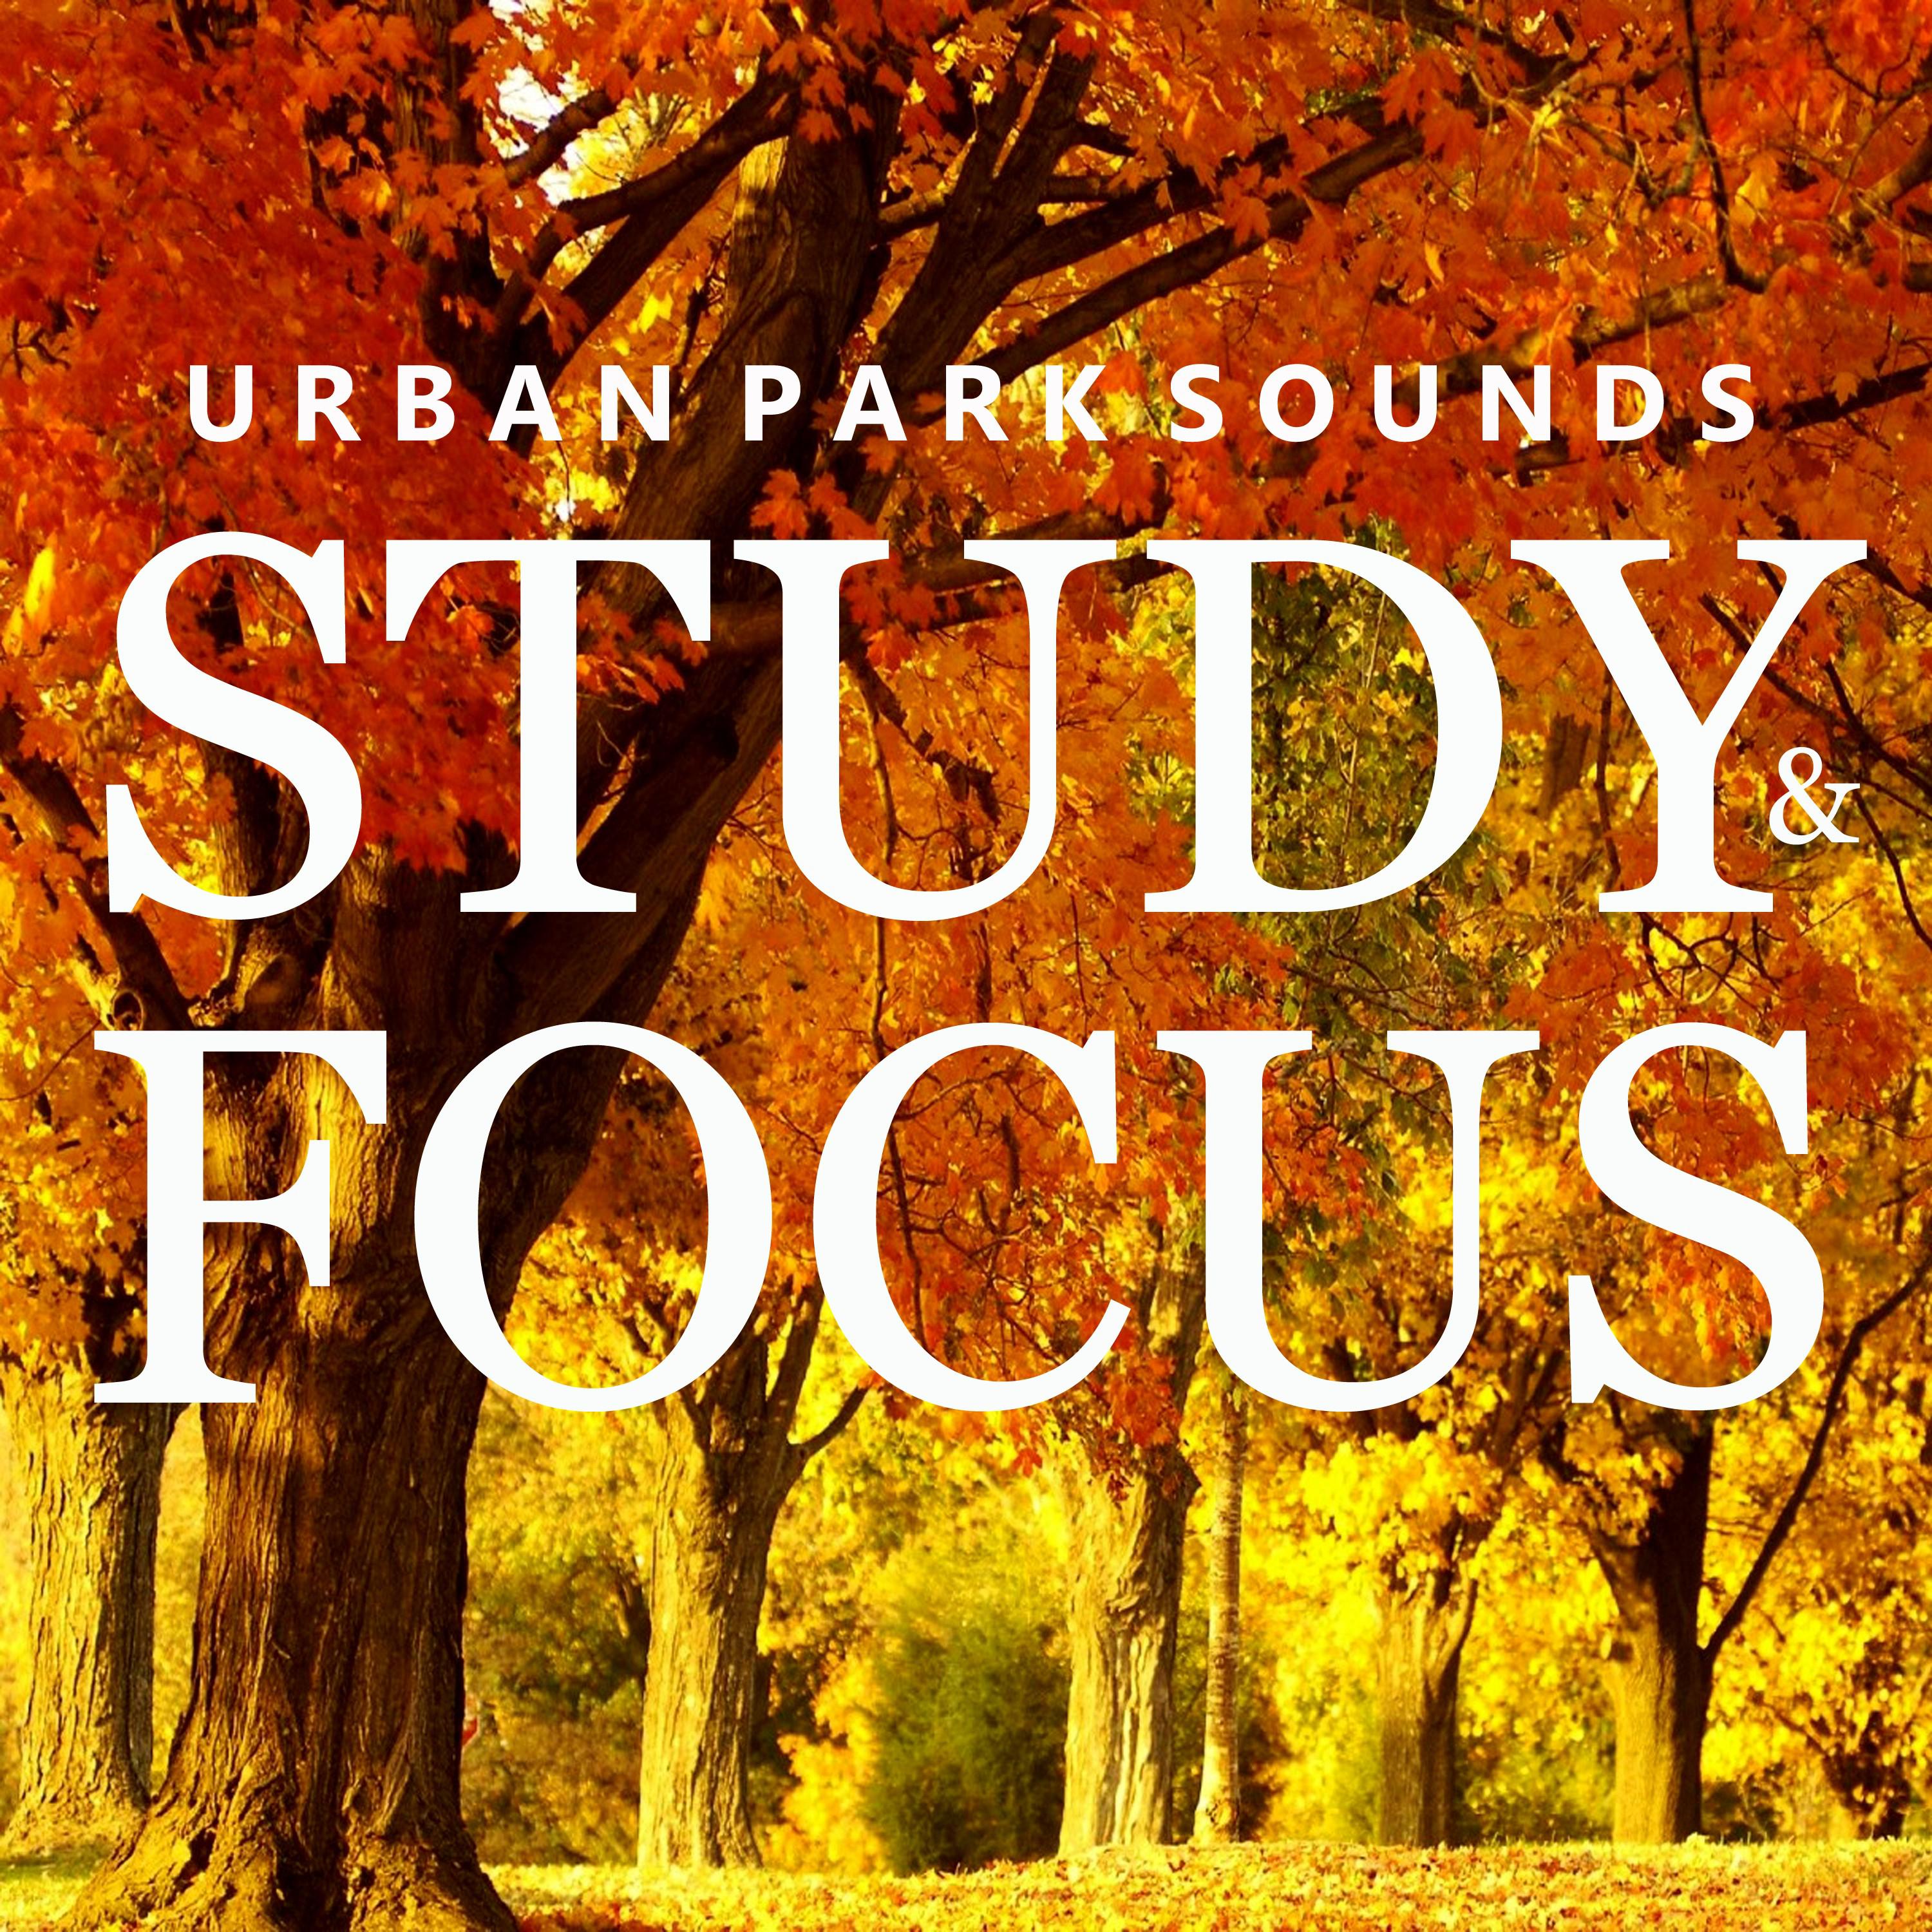 Urban Park Sounds for Studying, Pt. 18